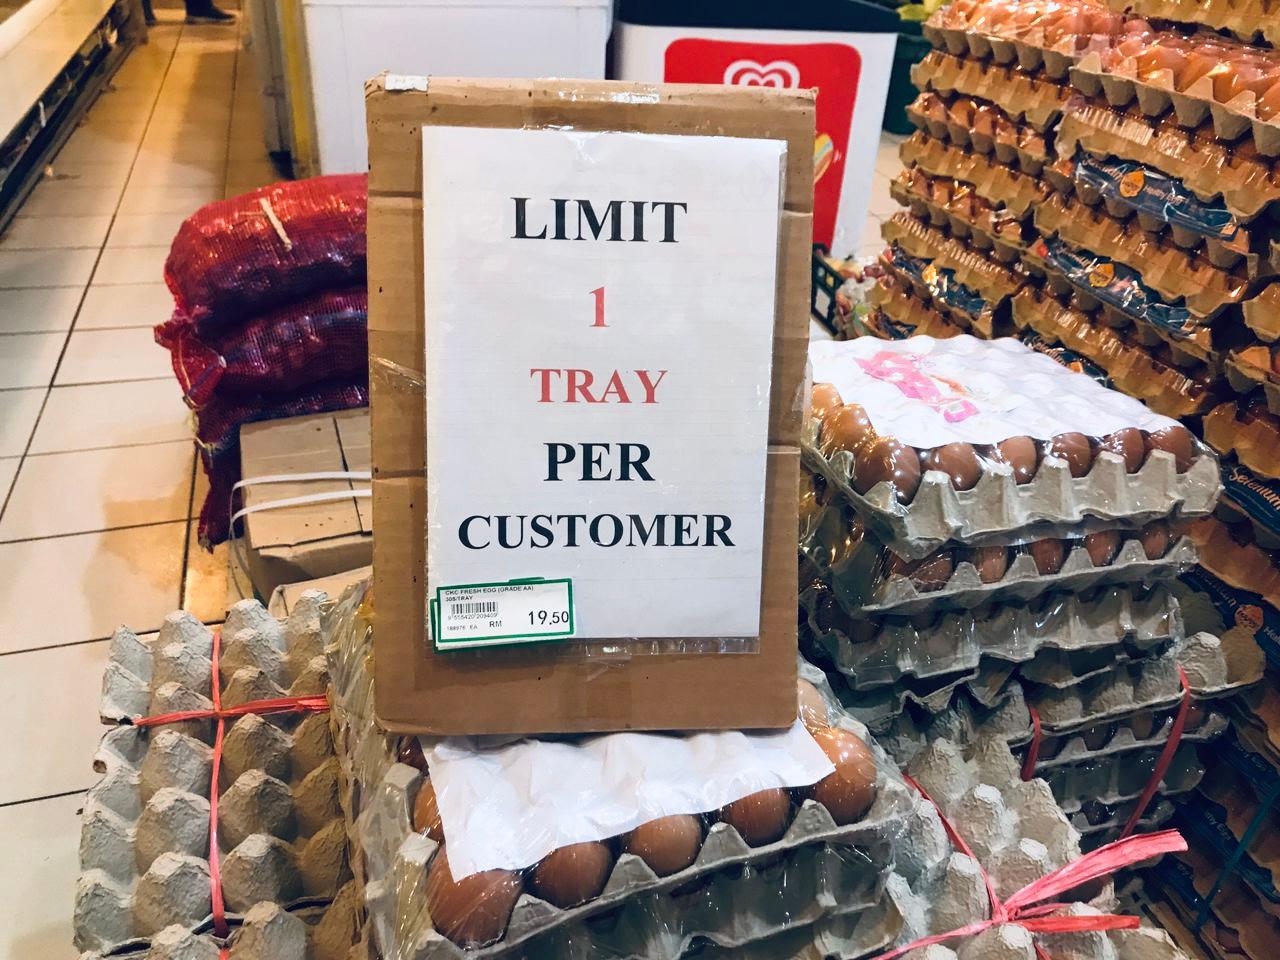 A sign at a mart in Sarawak informs customers that they are limited to one tray of eggs each.